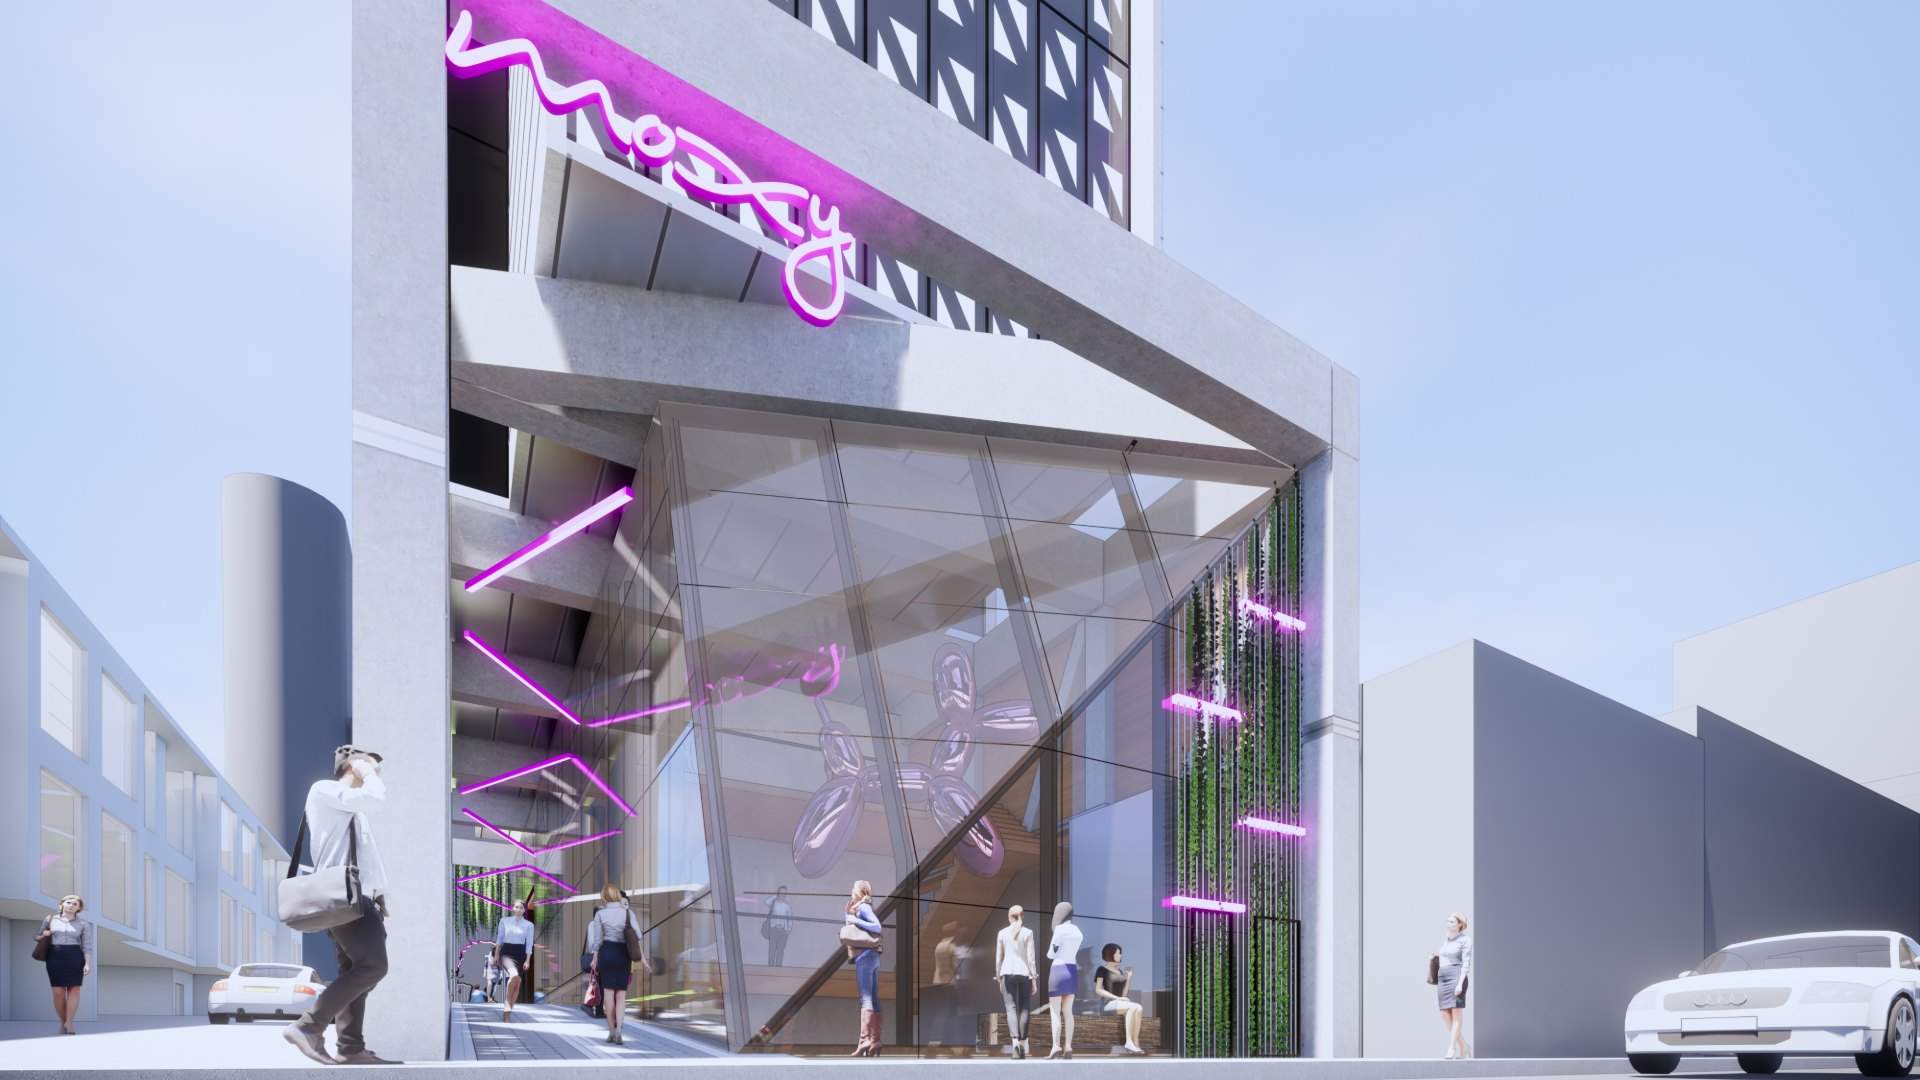 South Yarra Will Soon Be Home to Australia's First Moxy Hotel